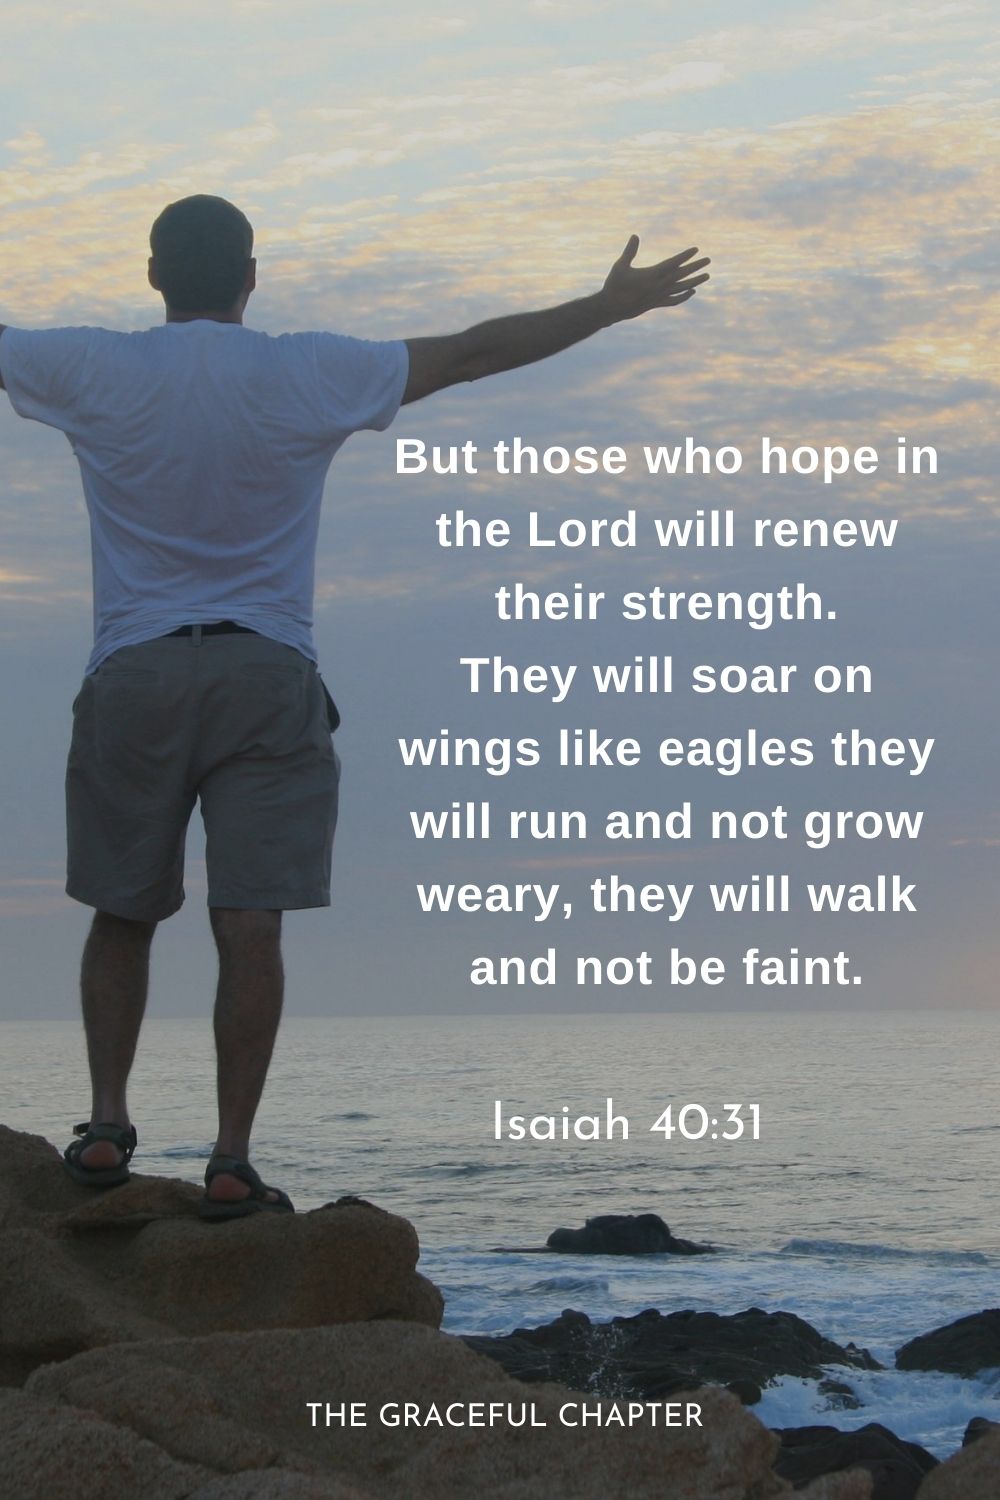 But those who hope in the Lord will renew their strength. They will soar on wings like eagles they will run and not grow weary, they will walk and not be faint.